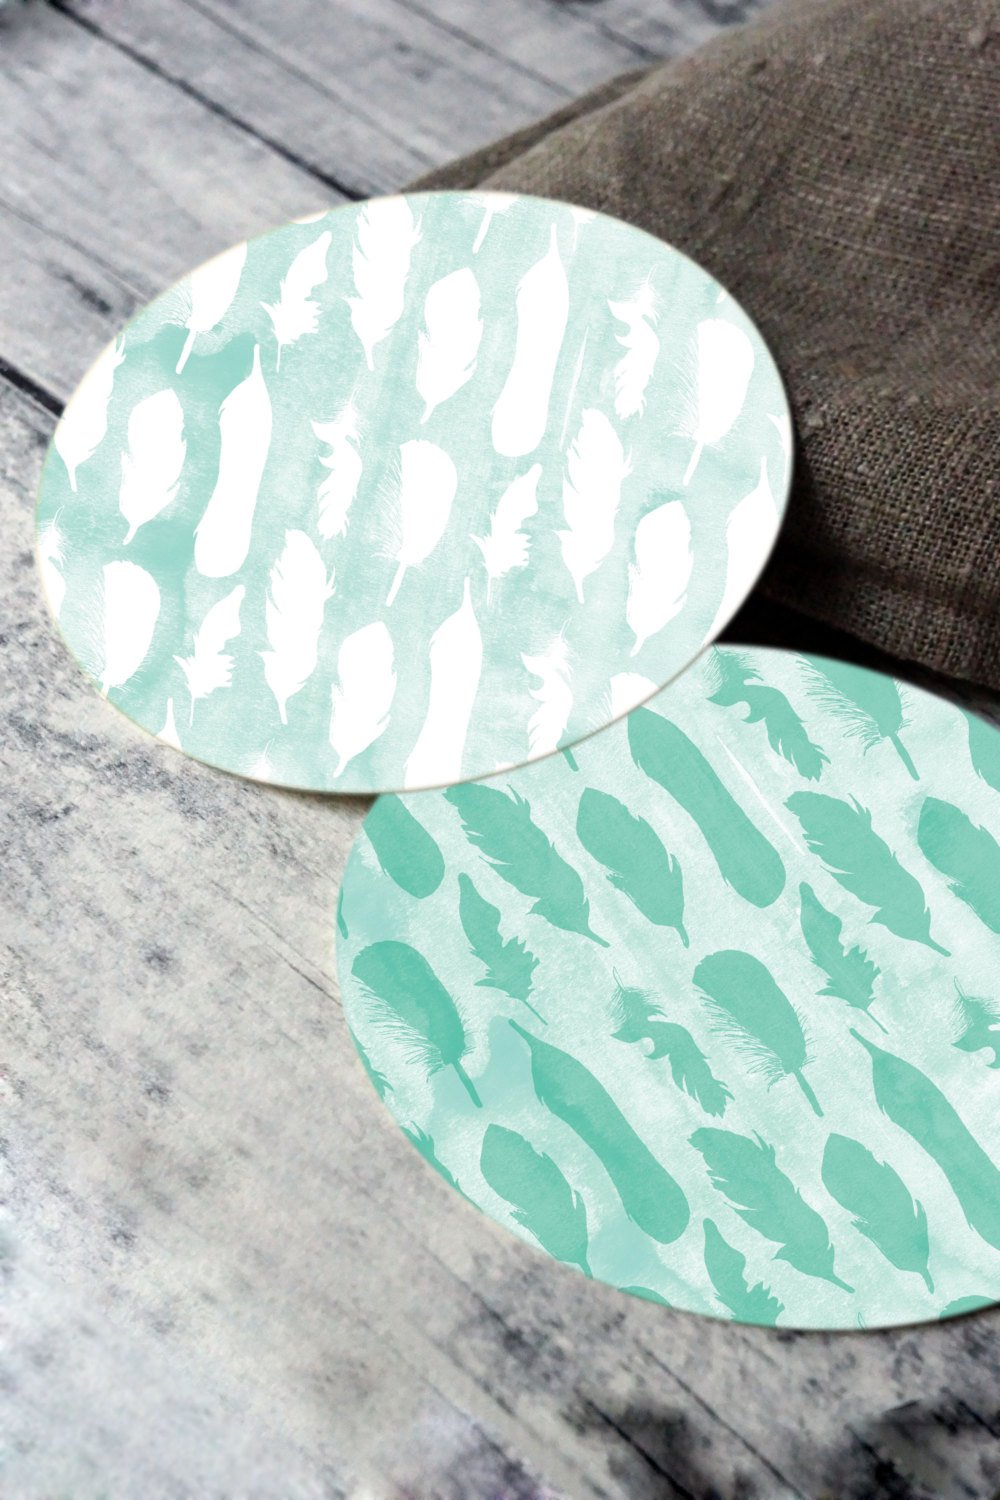 Printable round tags or cupcake toppers  - Mint Feather and Dots Digital Circle Collage Sheet